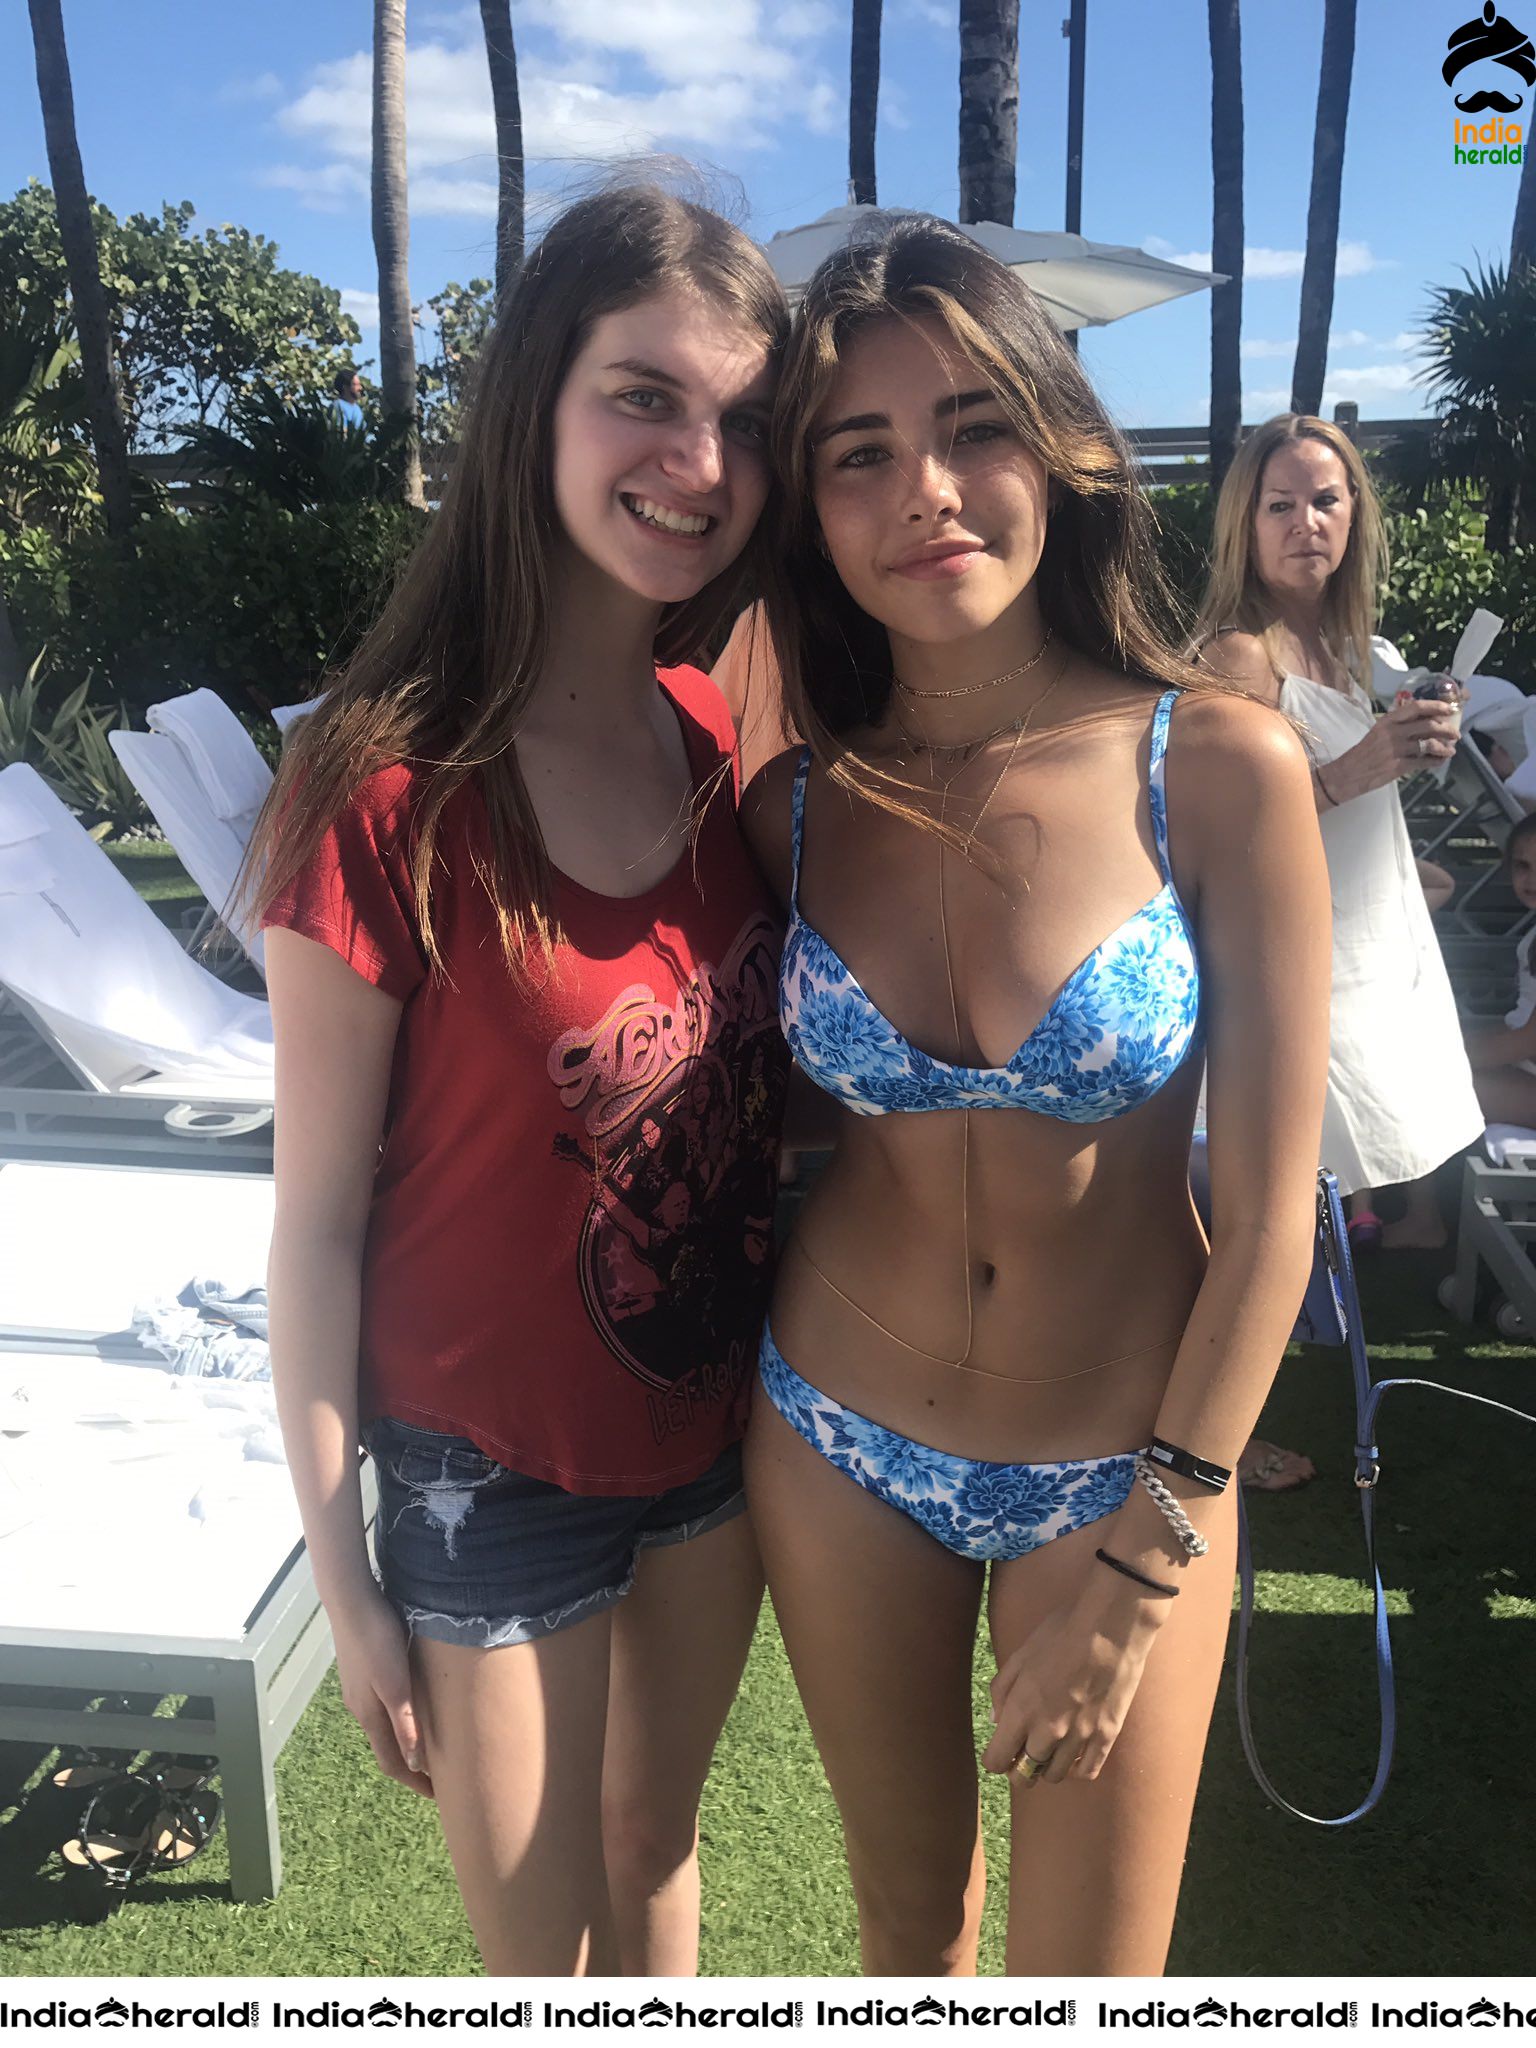 Madison Beer Clicked in Bikini by fans in Miami Set 1